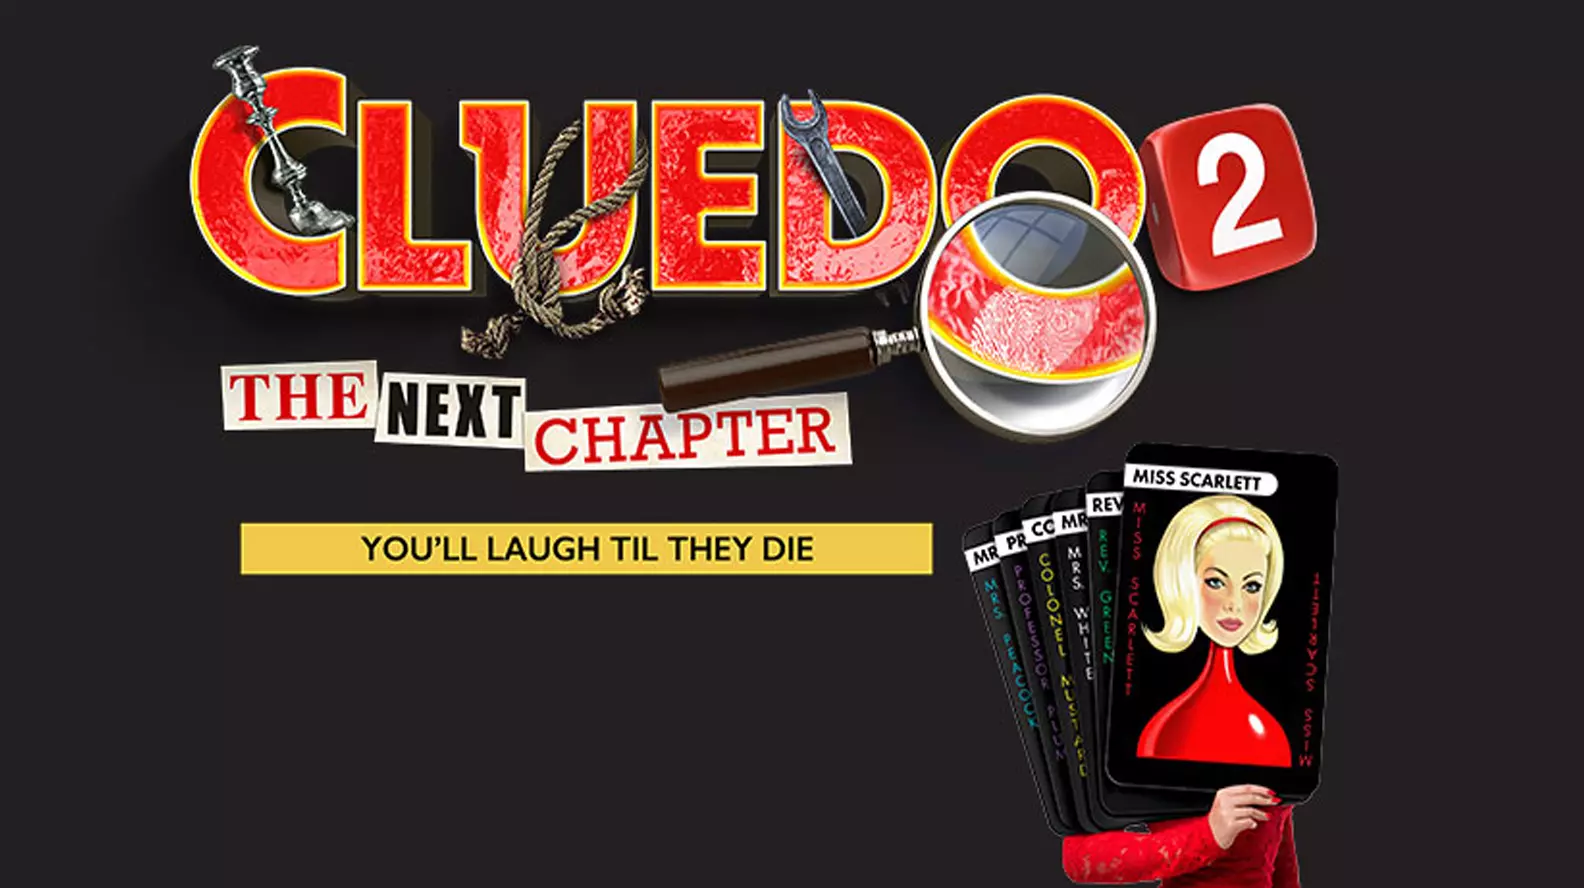 Jason Durr and Helen Flanagan to star in brand new comedy mystery CLUEDO 2 - THE NEXT CHAPTER